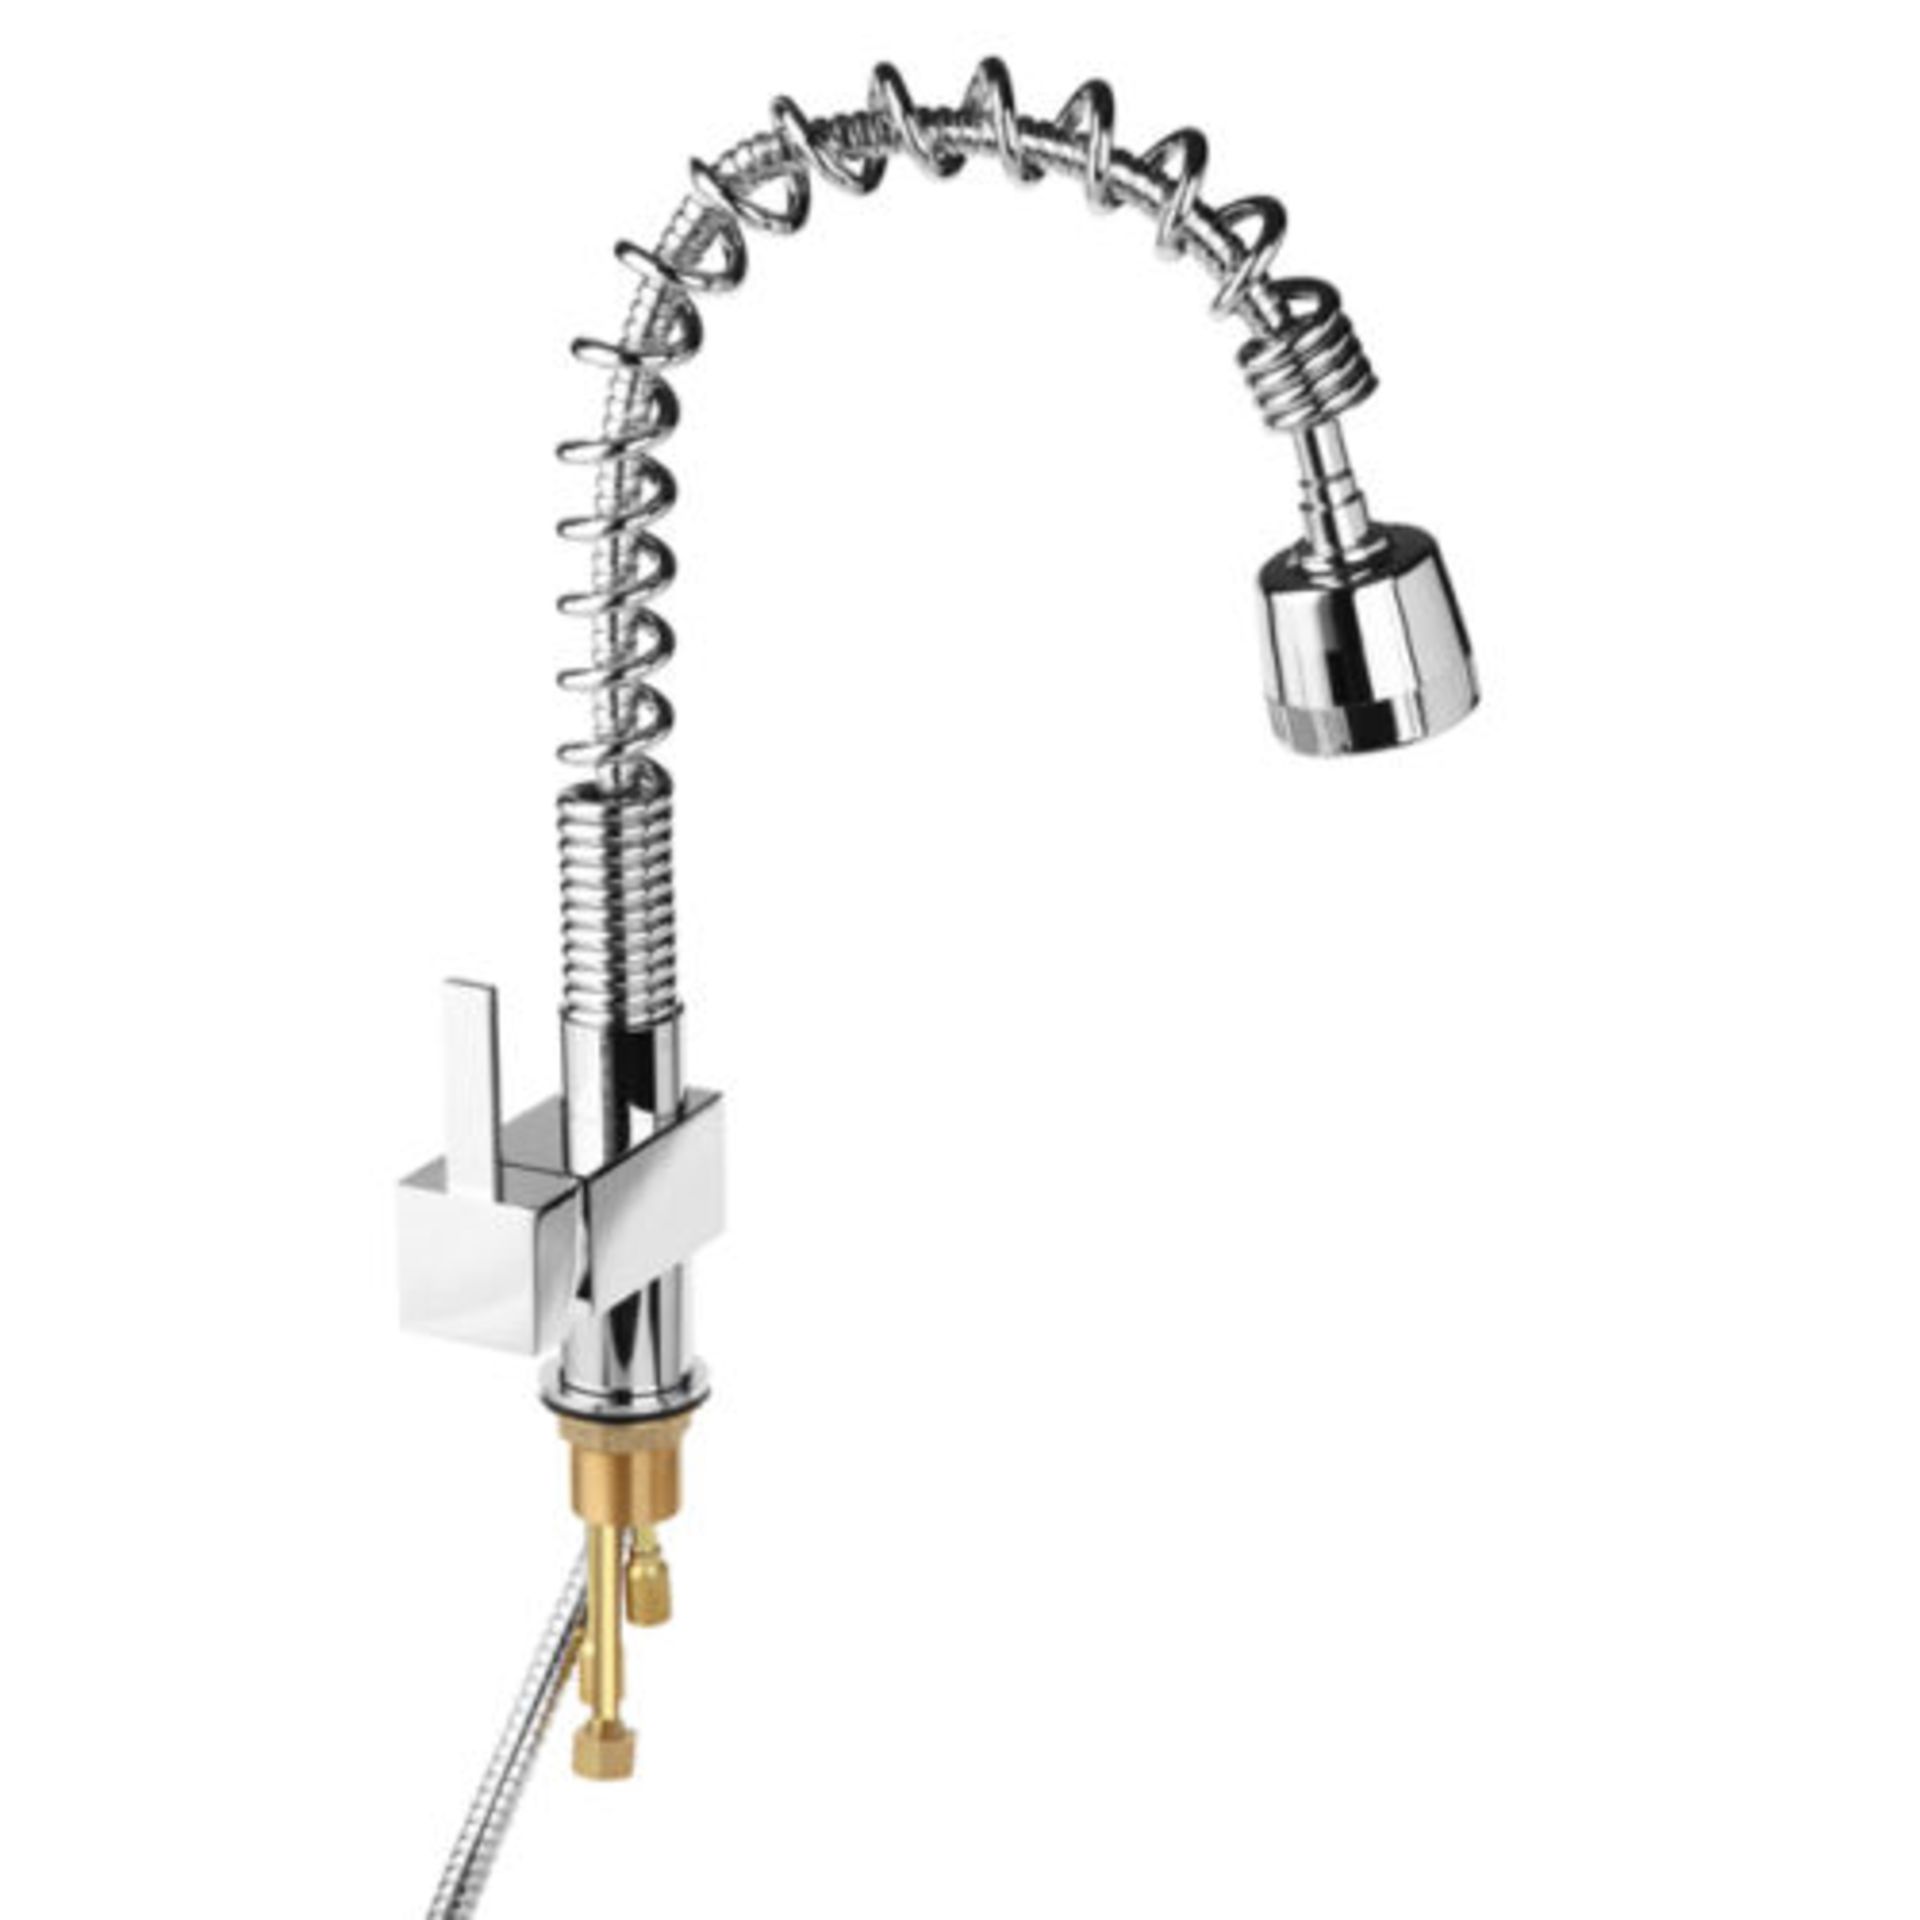 (L169) Maddie Brushed Chrome Monobloc Kitchen Tap Swivel Pull Out Spray Mixer. RRP £219.99. - Image 2 of 2